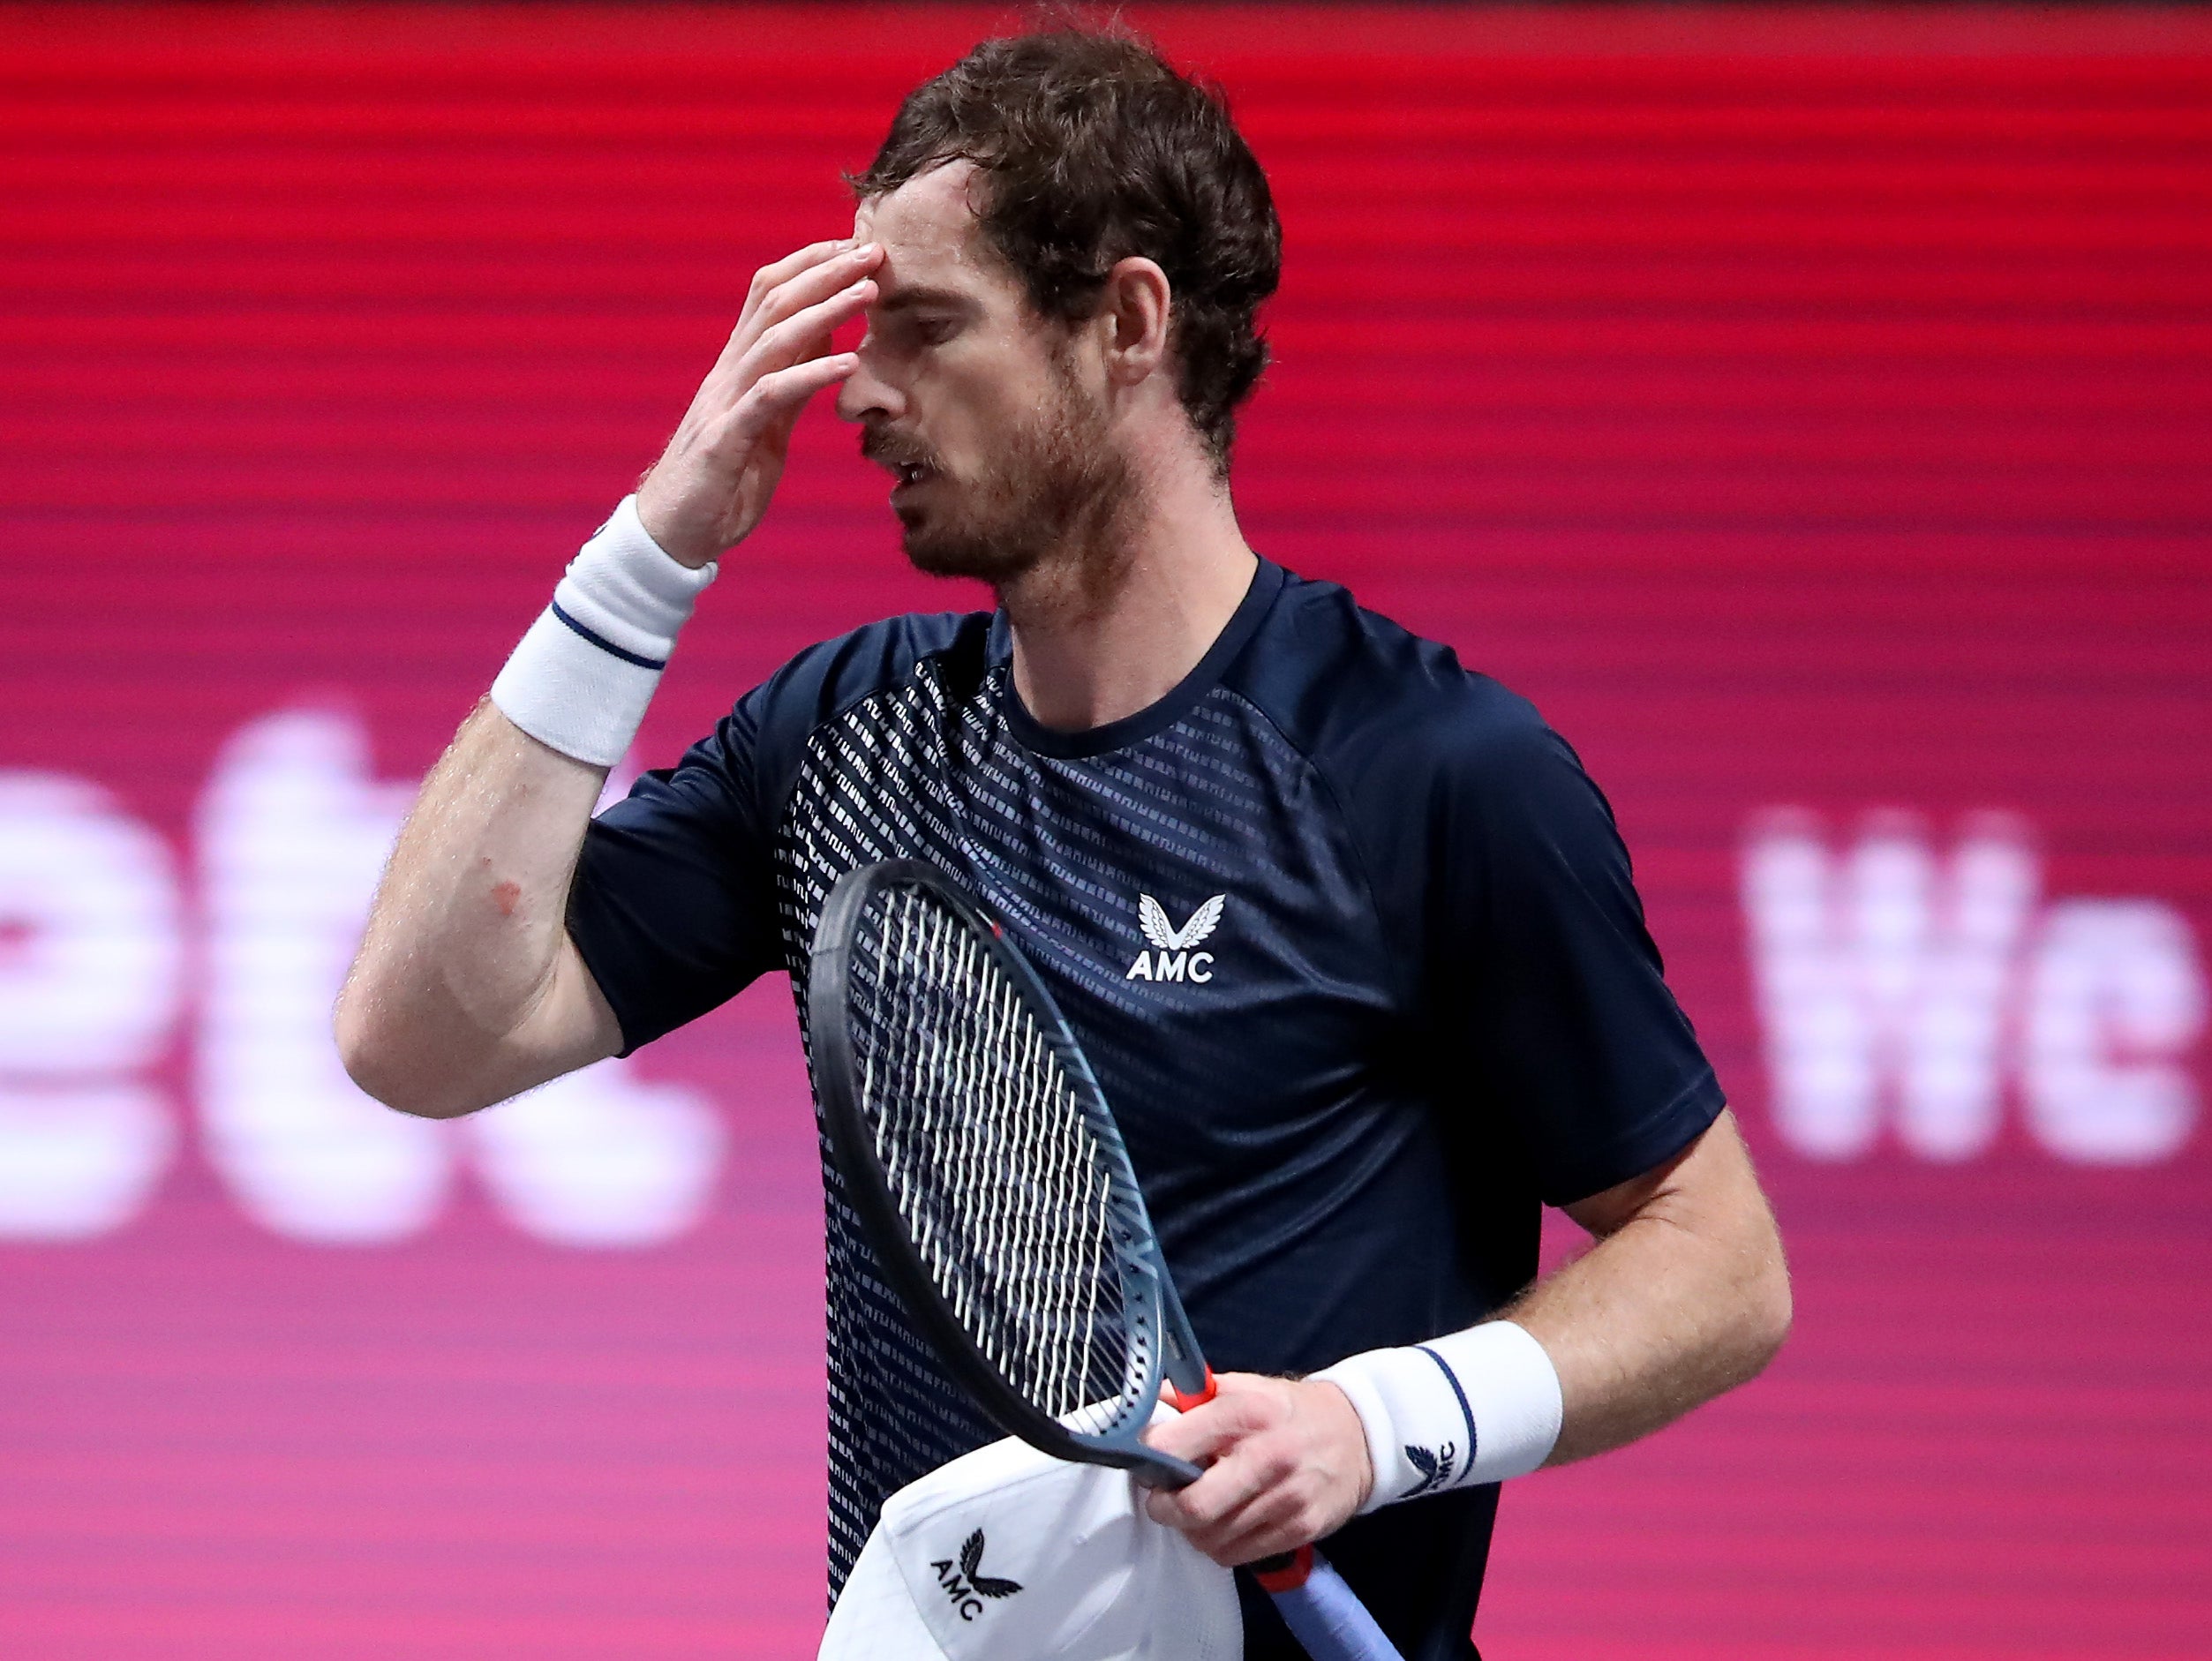 Andy Murray lost in straight sets to Fernando Verdasco in Germany